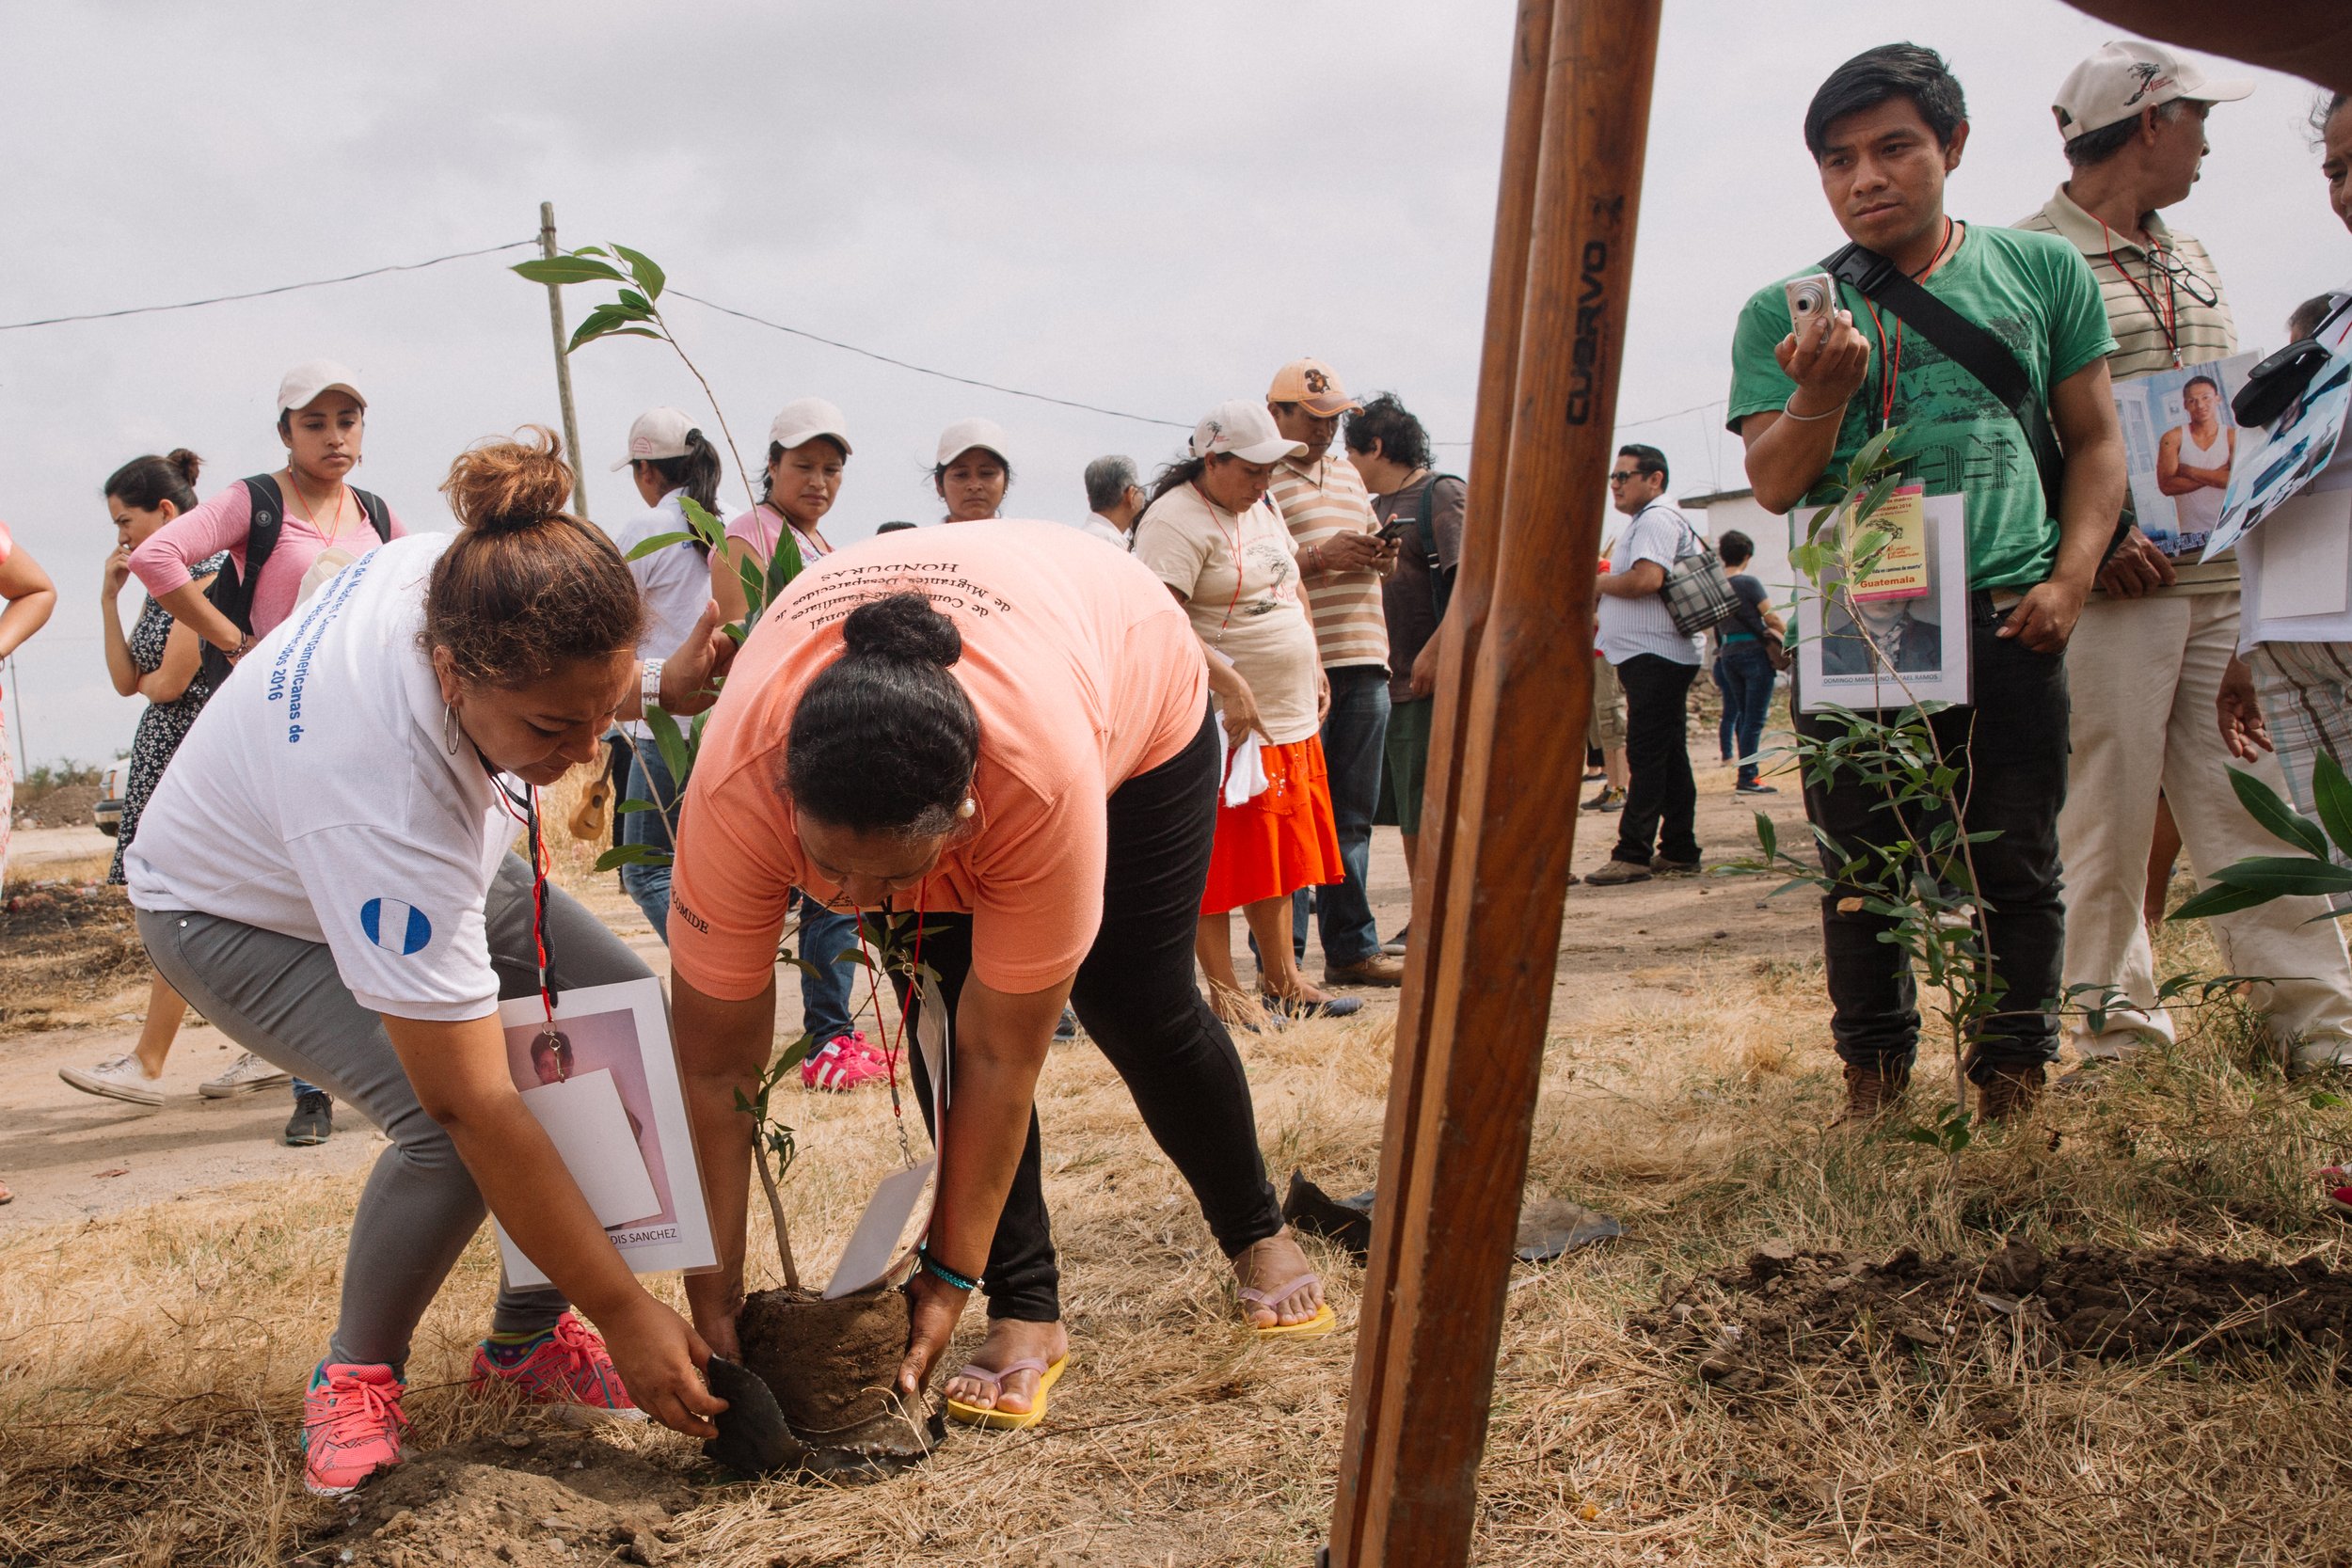  Two grieving mothers find solace in a symbolic act of remembrance, as they plant a tree in the section of the cemetery where a mass grave of unidentified migrant bodies is buried. Their hearts heavy with sorrow, the women honor the memory of those w